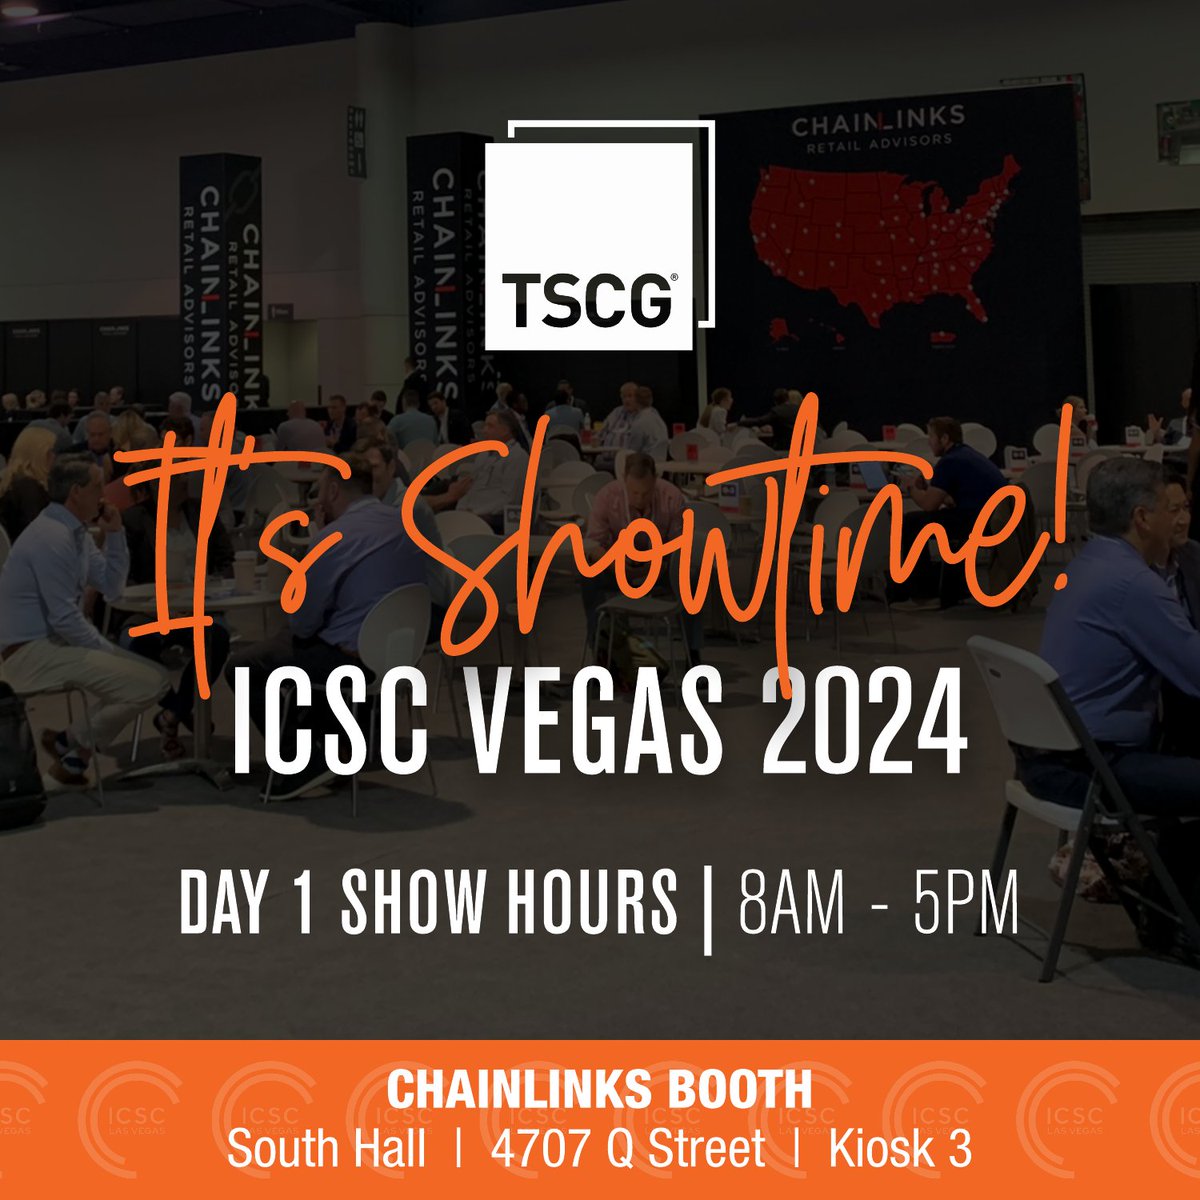 ICSC Vegas 2023 - It's Showtime!

We will see you on the show floor at ChainLinks Booth #4707Q in the South Hall. Show hours for today are 8:00 am to 5:00 pm so come say hello!

#tscg #icsc #icscvegas2024 #whathappensinvegas #cre #letschat